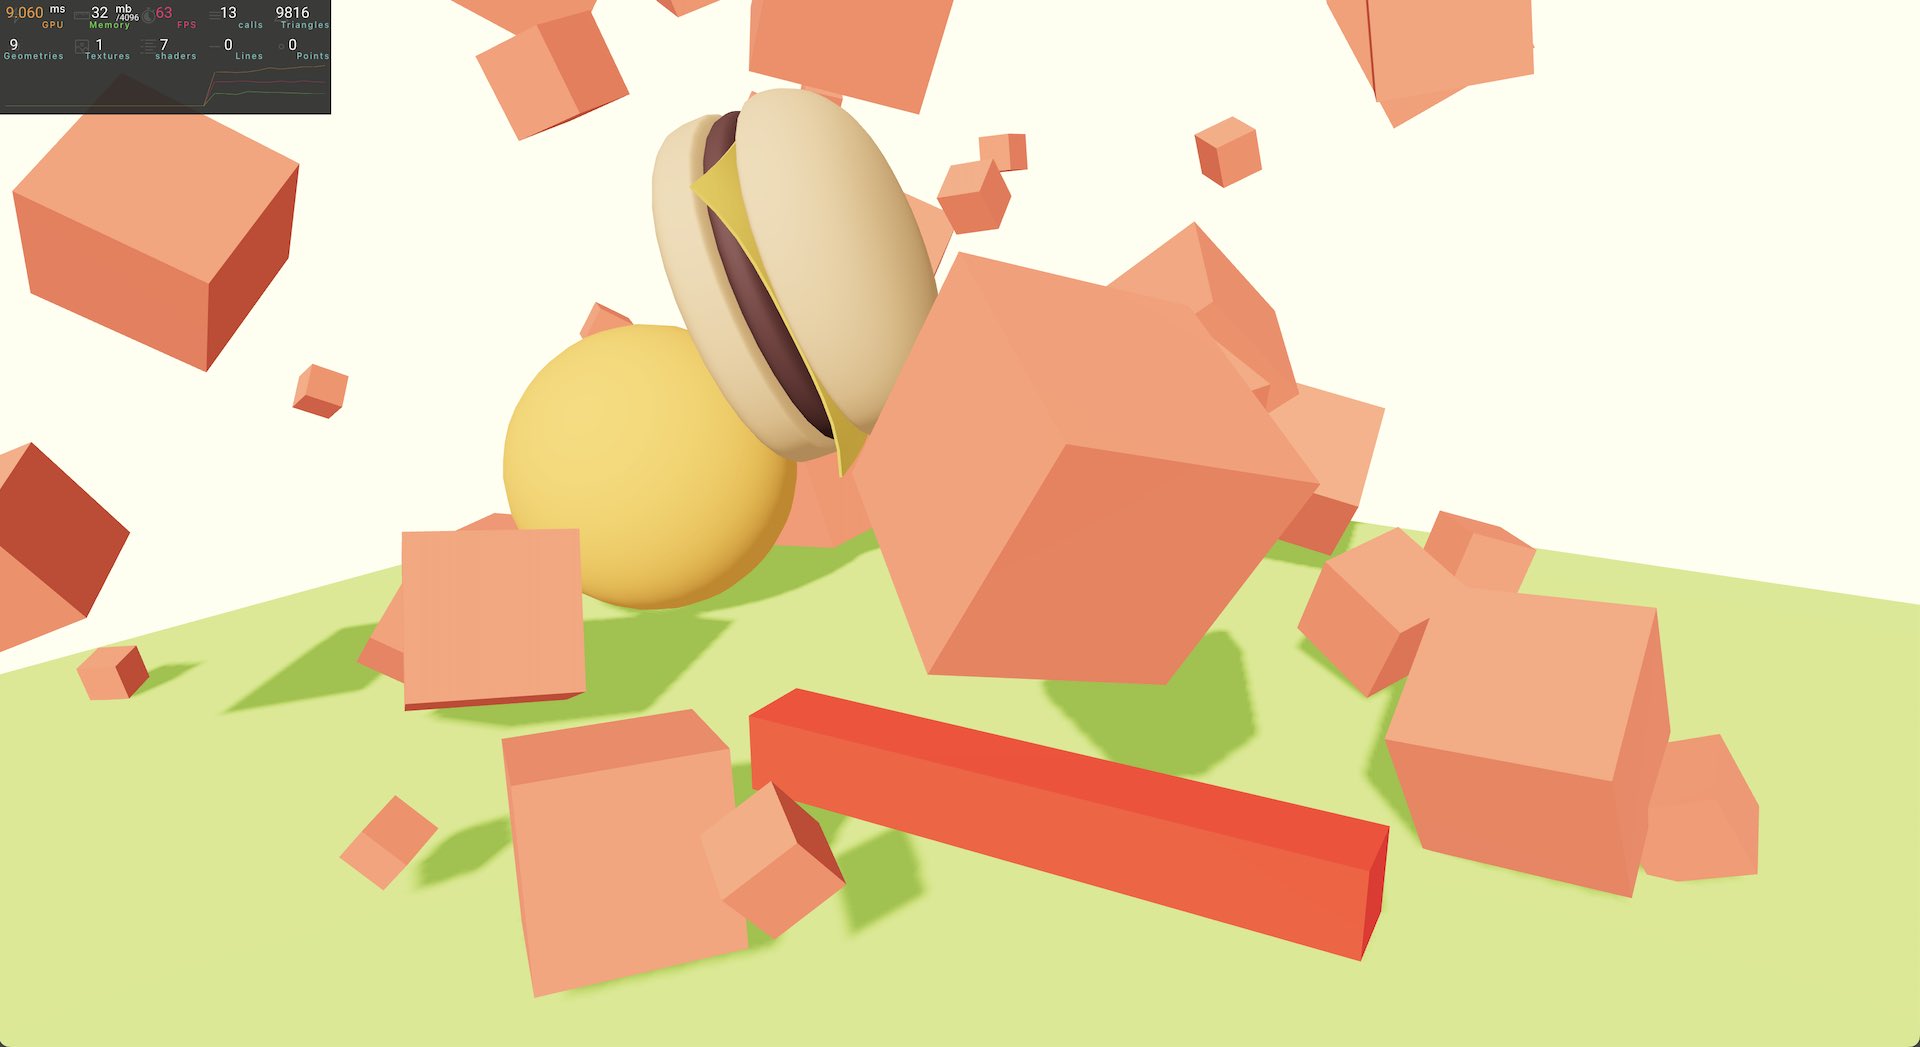 Multiple peach cubes, a hamburger, and a yellow ball fall to a green floor with a spinning red rectangular block.